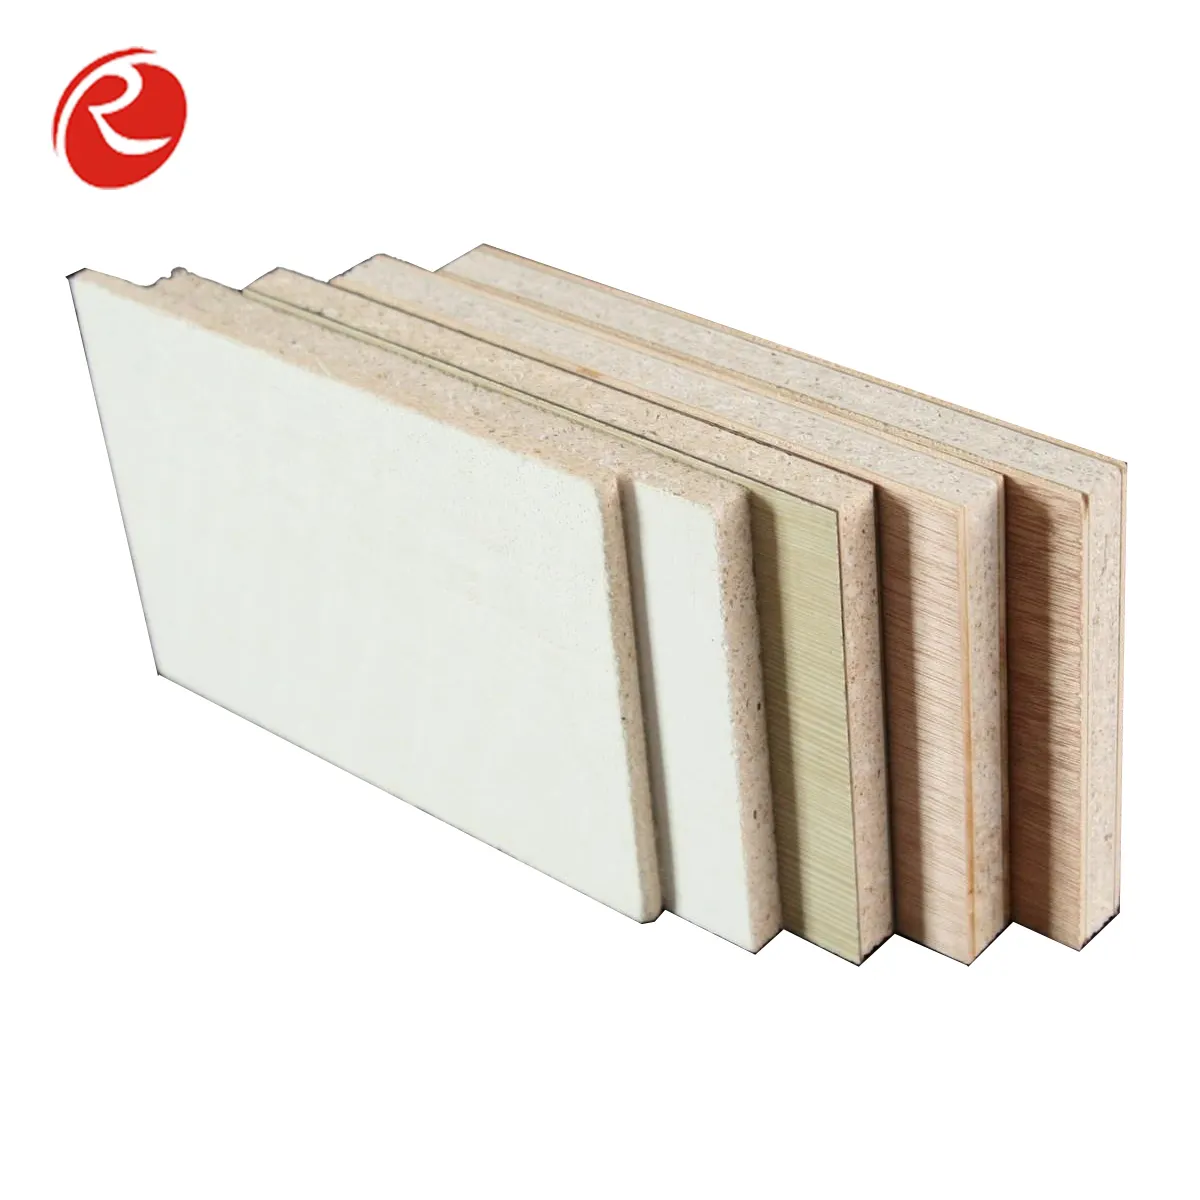 fire proof standard size plywood sheet mr p Even grain high pressure eco-friendly cracking resistance block Hpl plywood